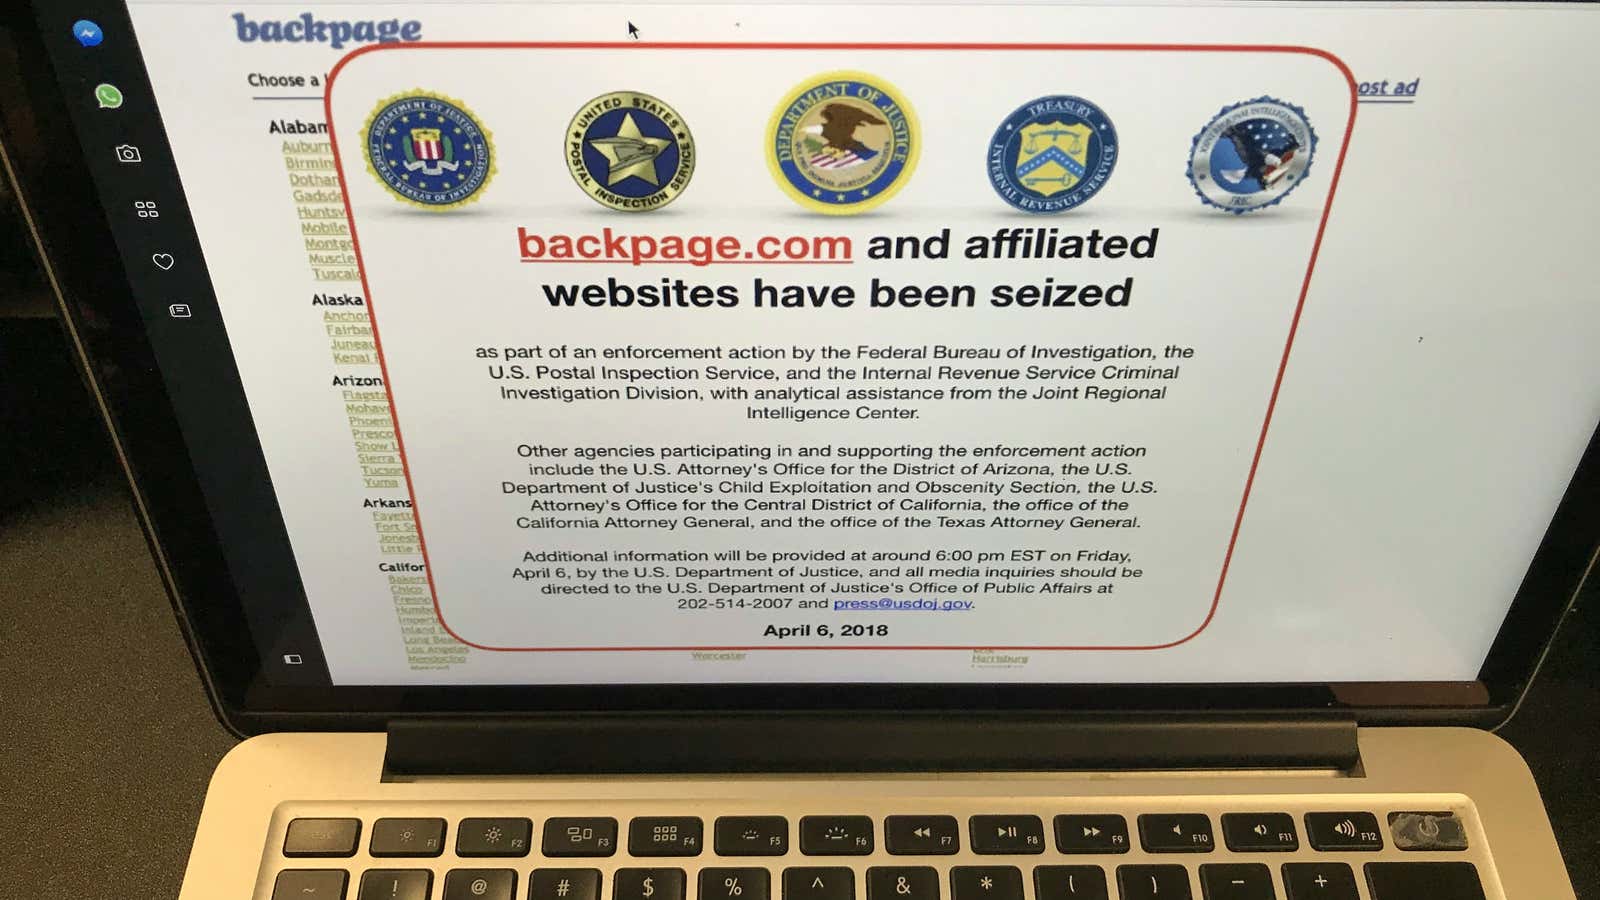 Hold the Backpage.com.